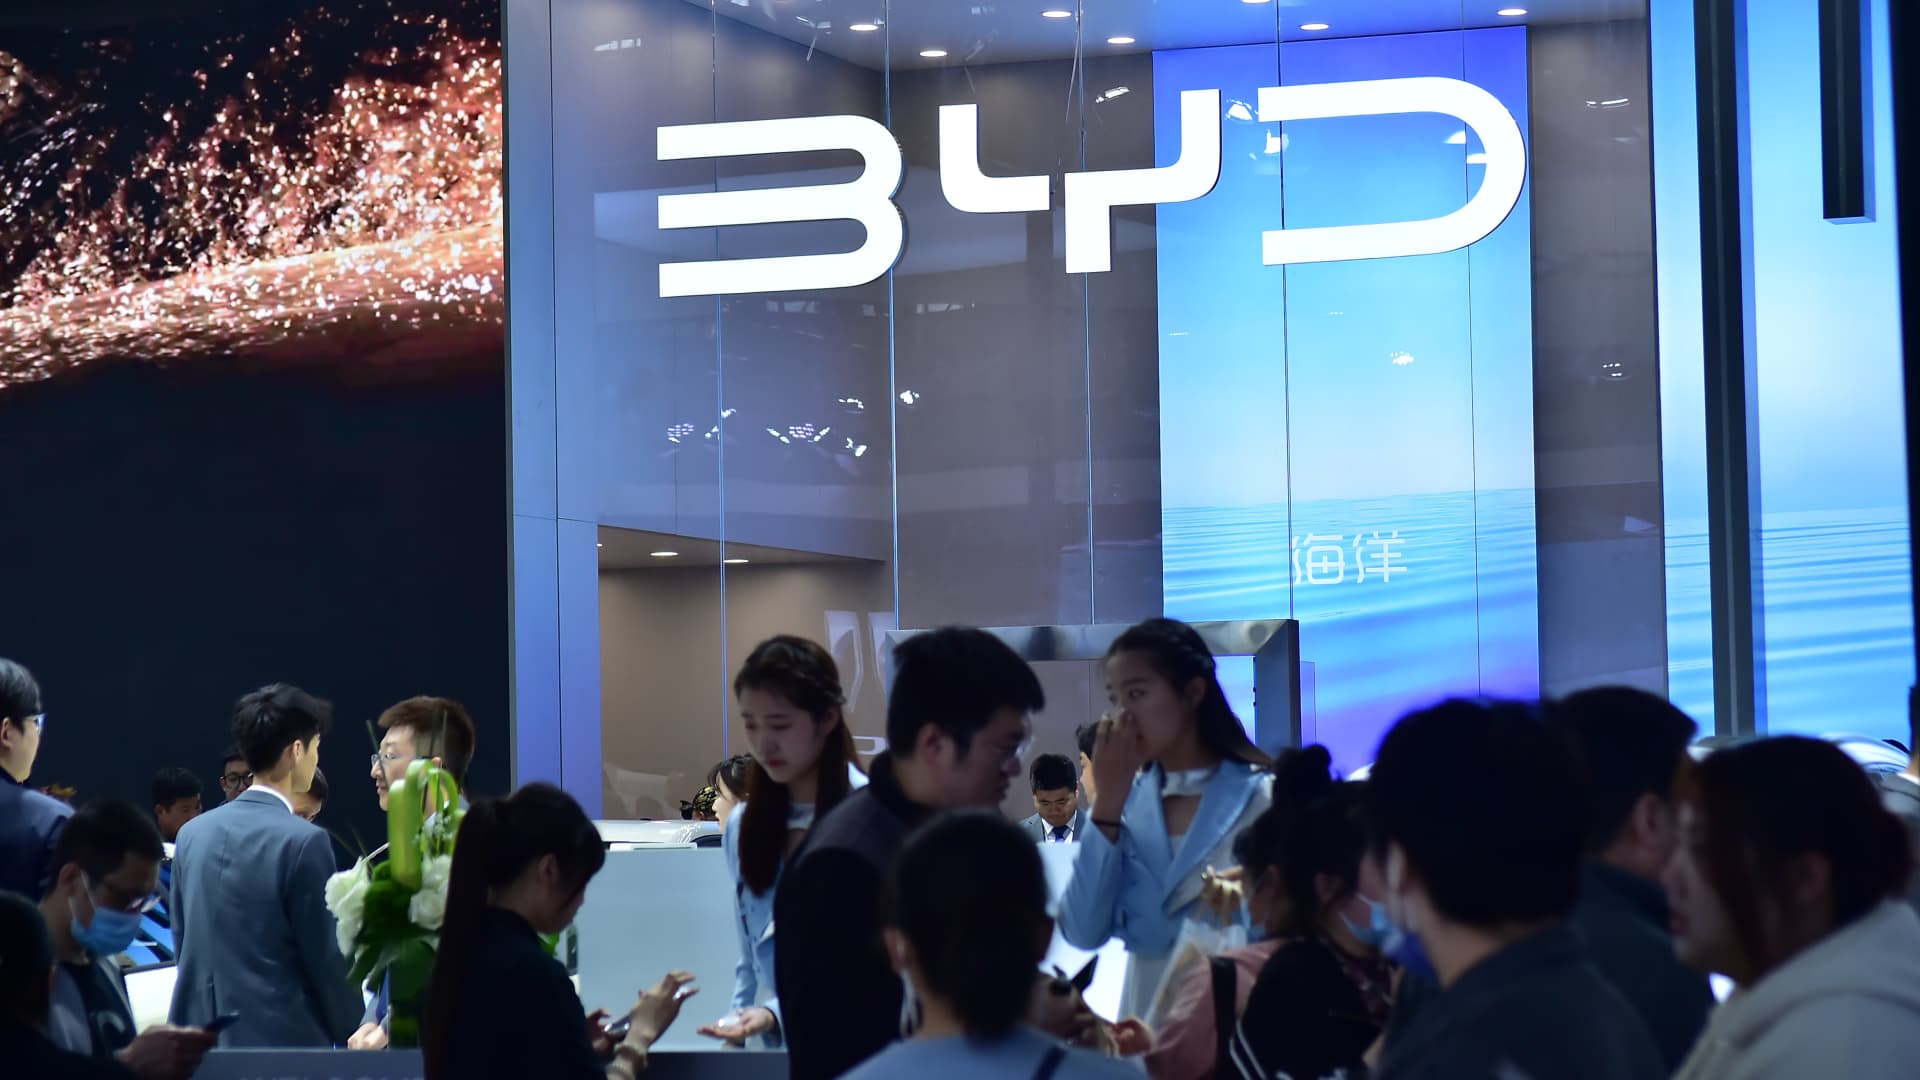 BYD and more: AllianceBernstein names top Asian stock picks for the next 6 months, gives one over 60% upside